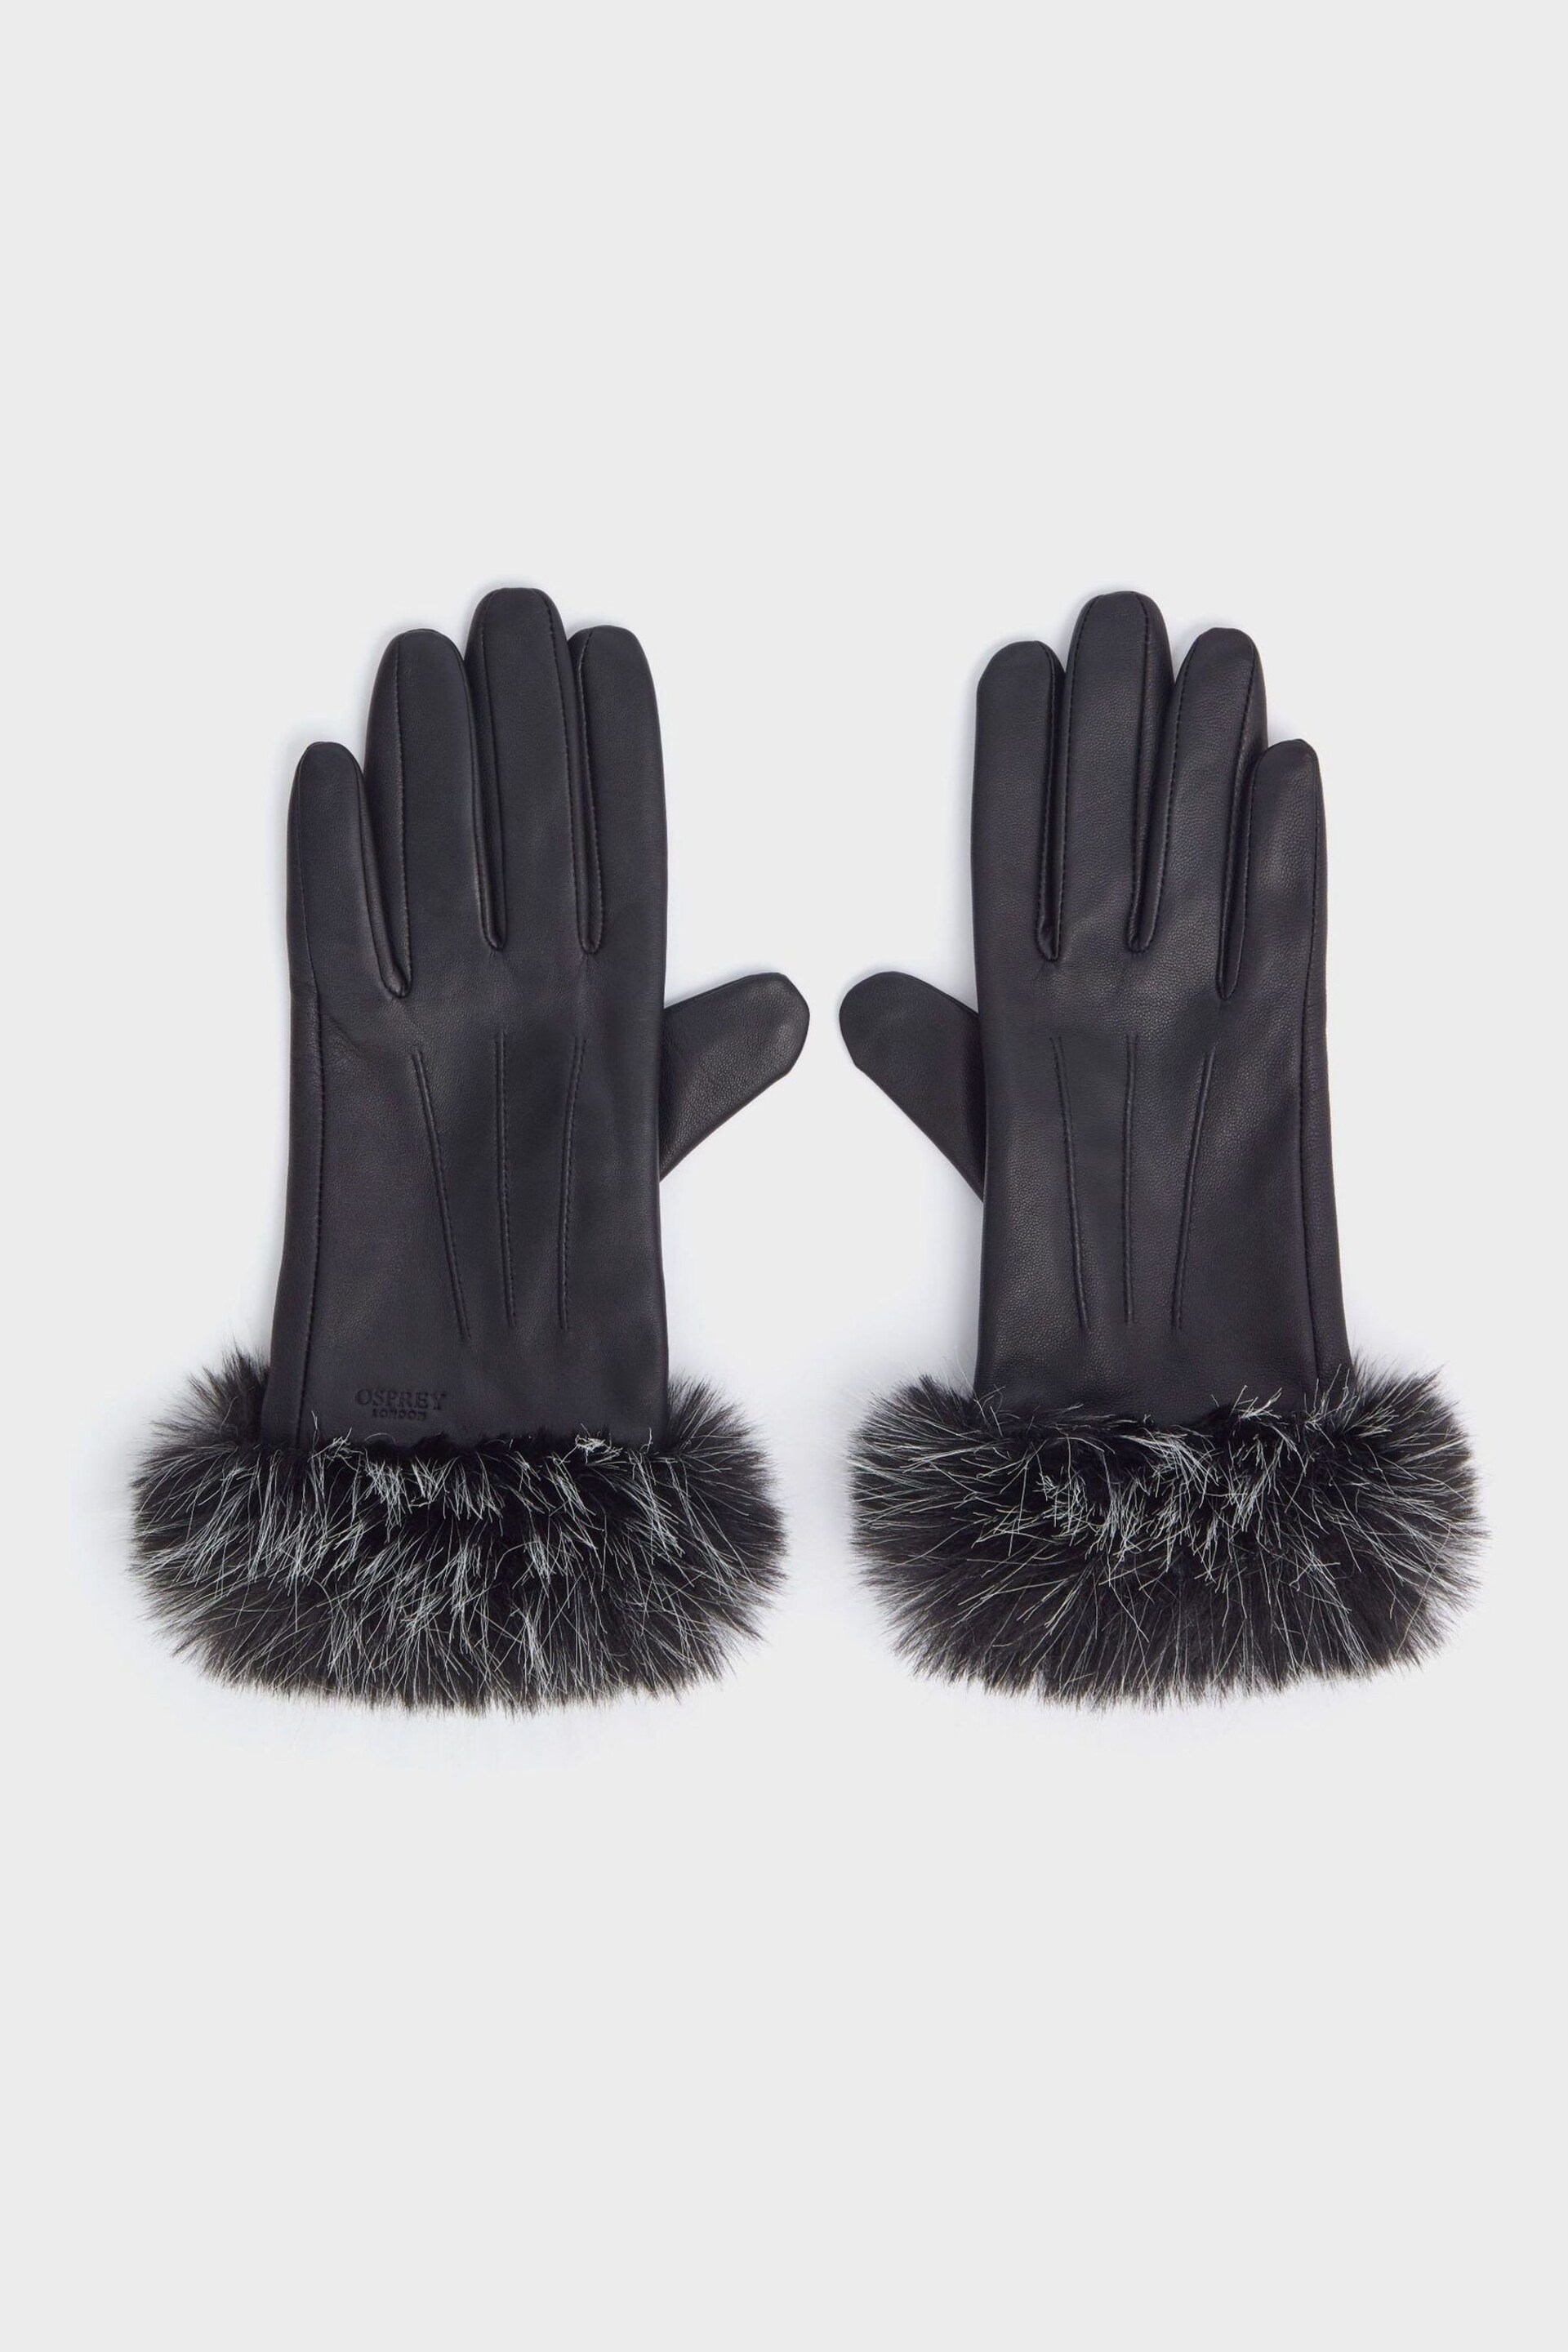 Osprey London The Penny Leather Gloves - Image 2 of 4